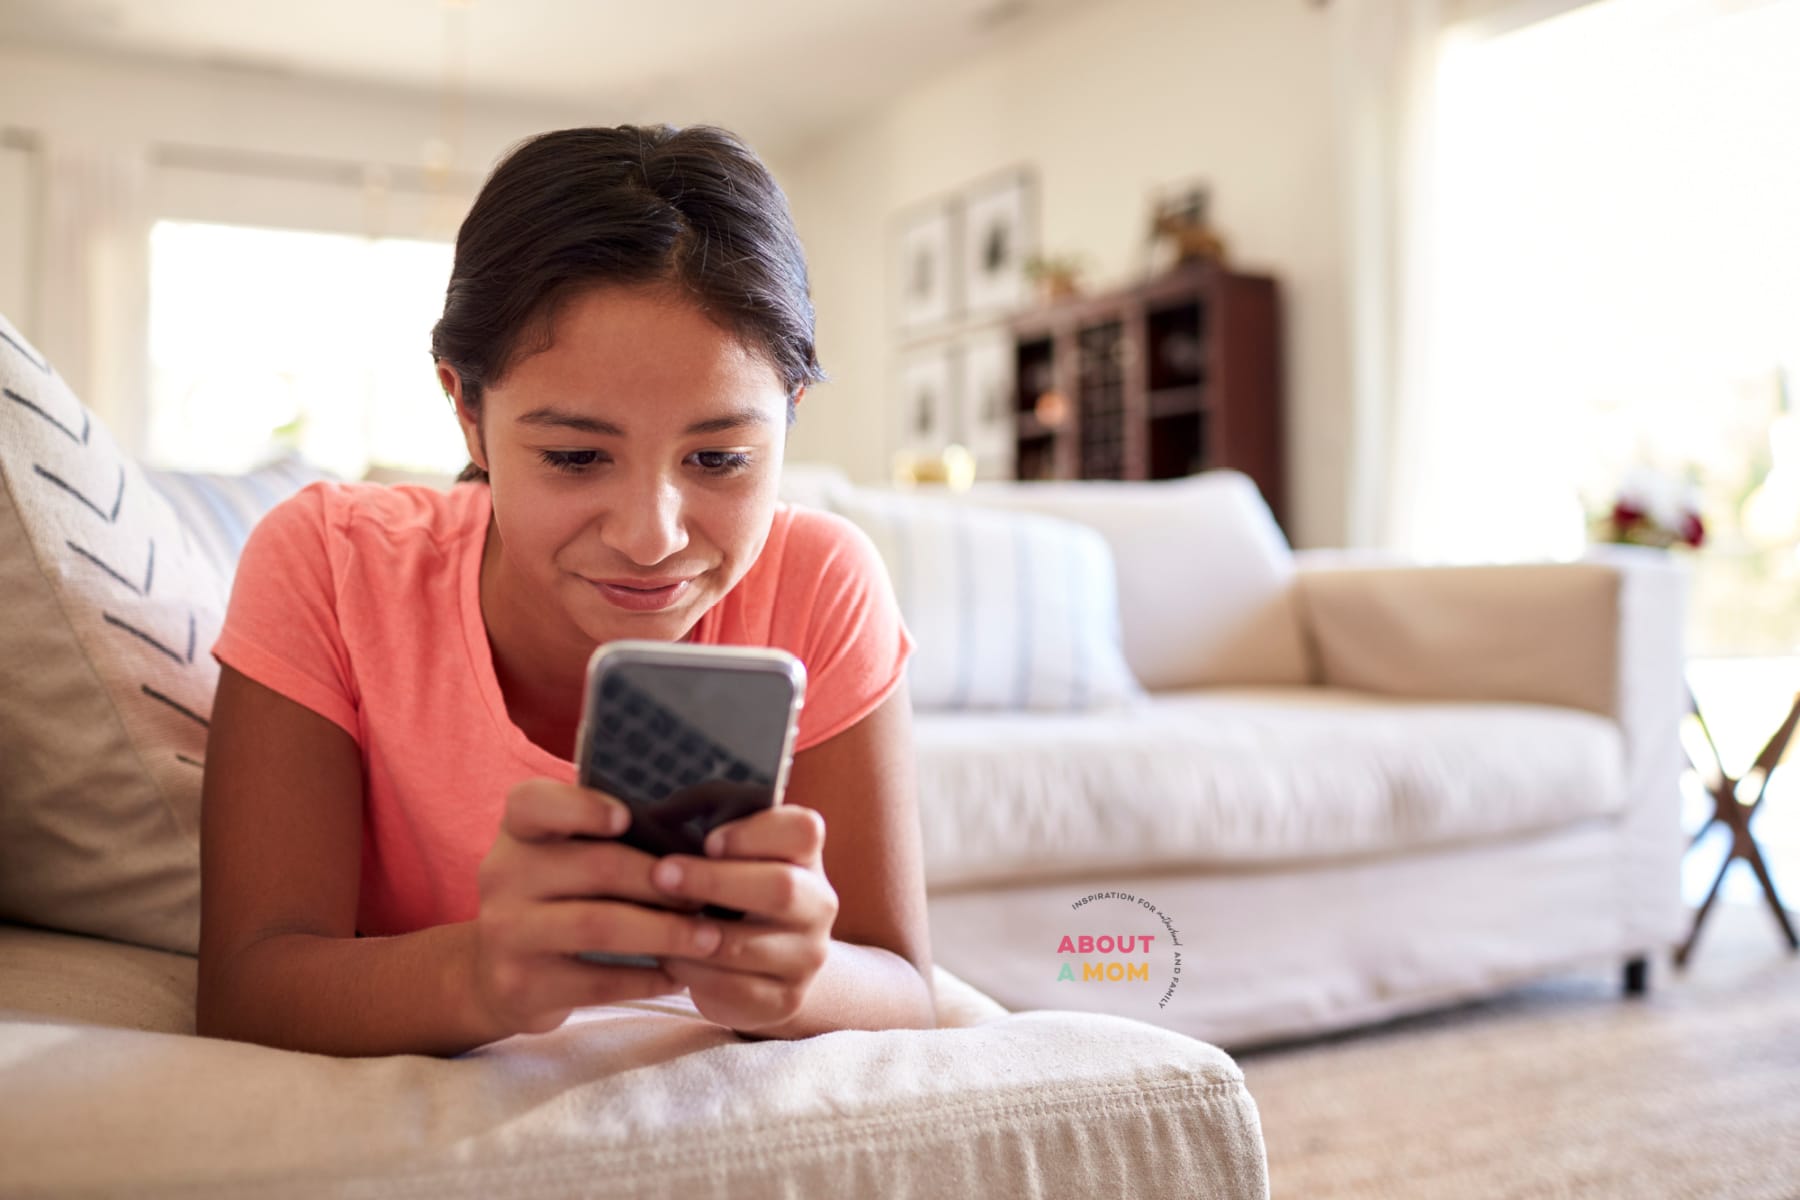 With over a billion active users, social media is a staple in most people's lives. Here's what parents should know about dangerous social media apps for kids.